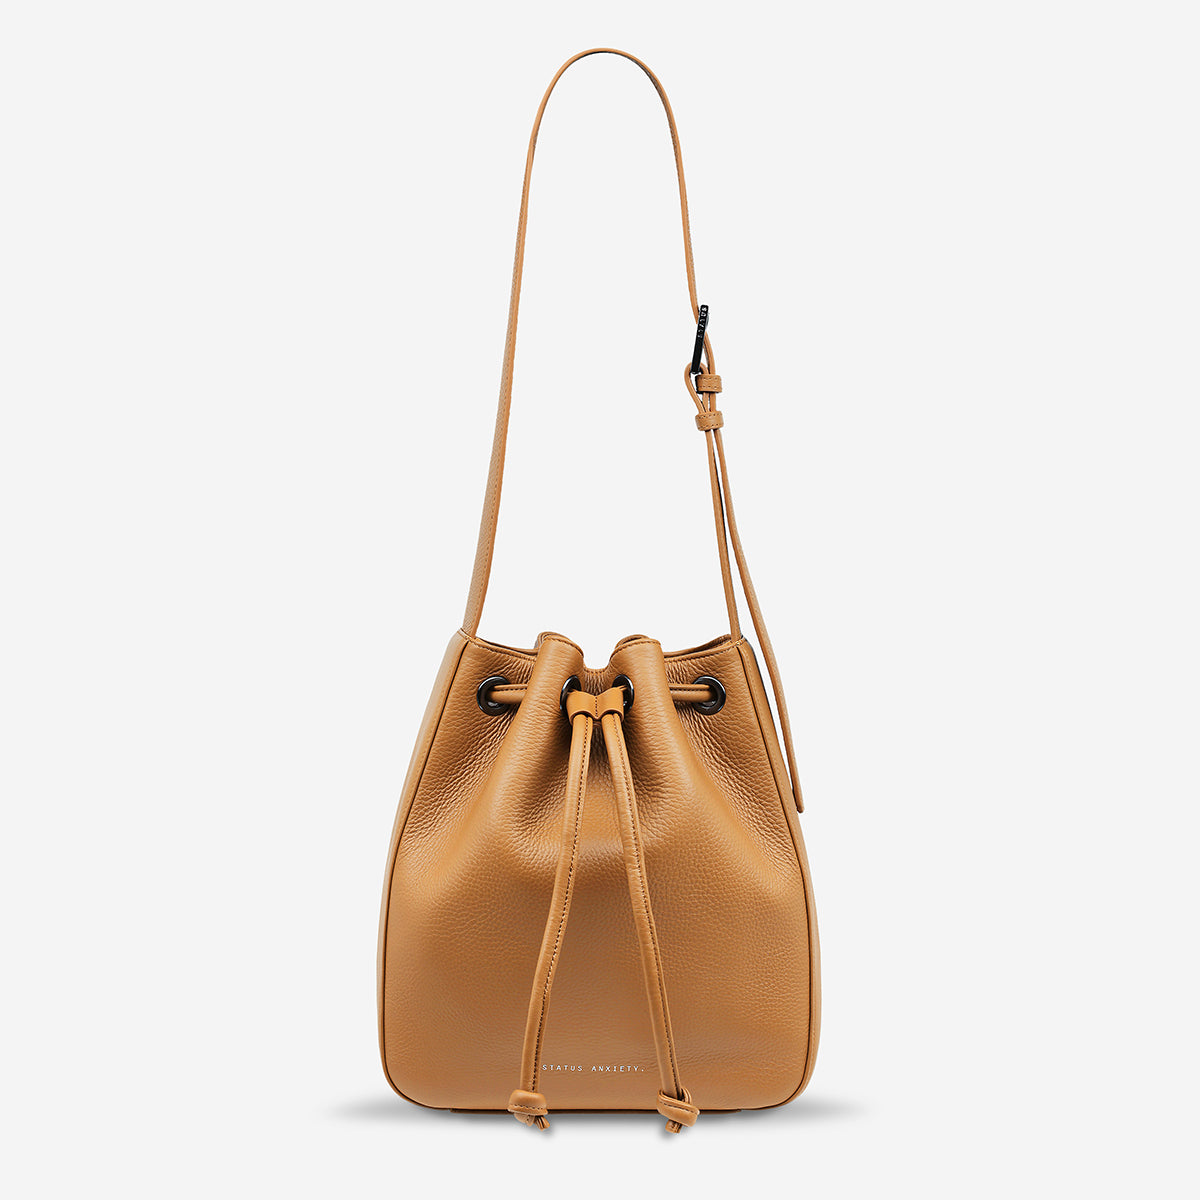 Status Anxiety Seclusion Women's Leather Bag Tan